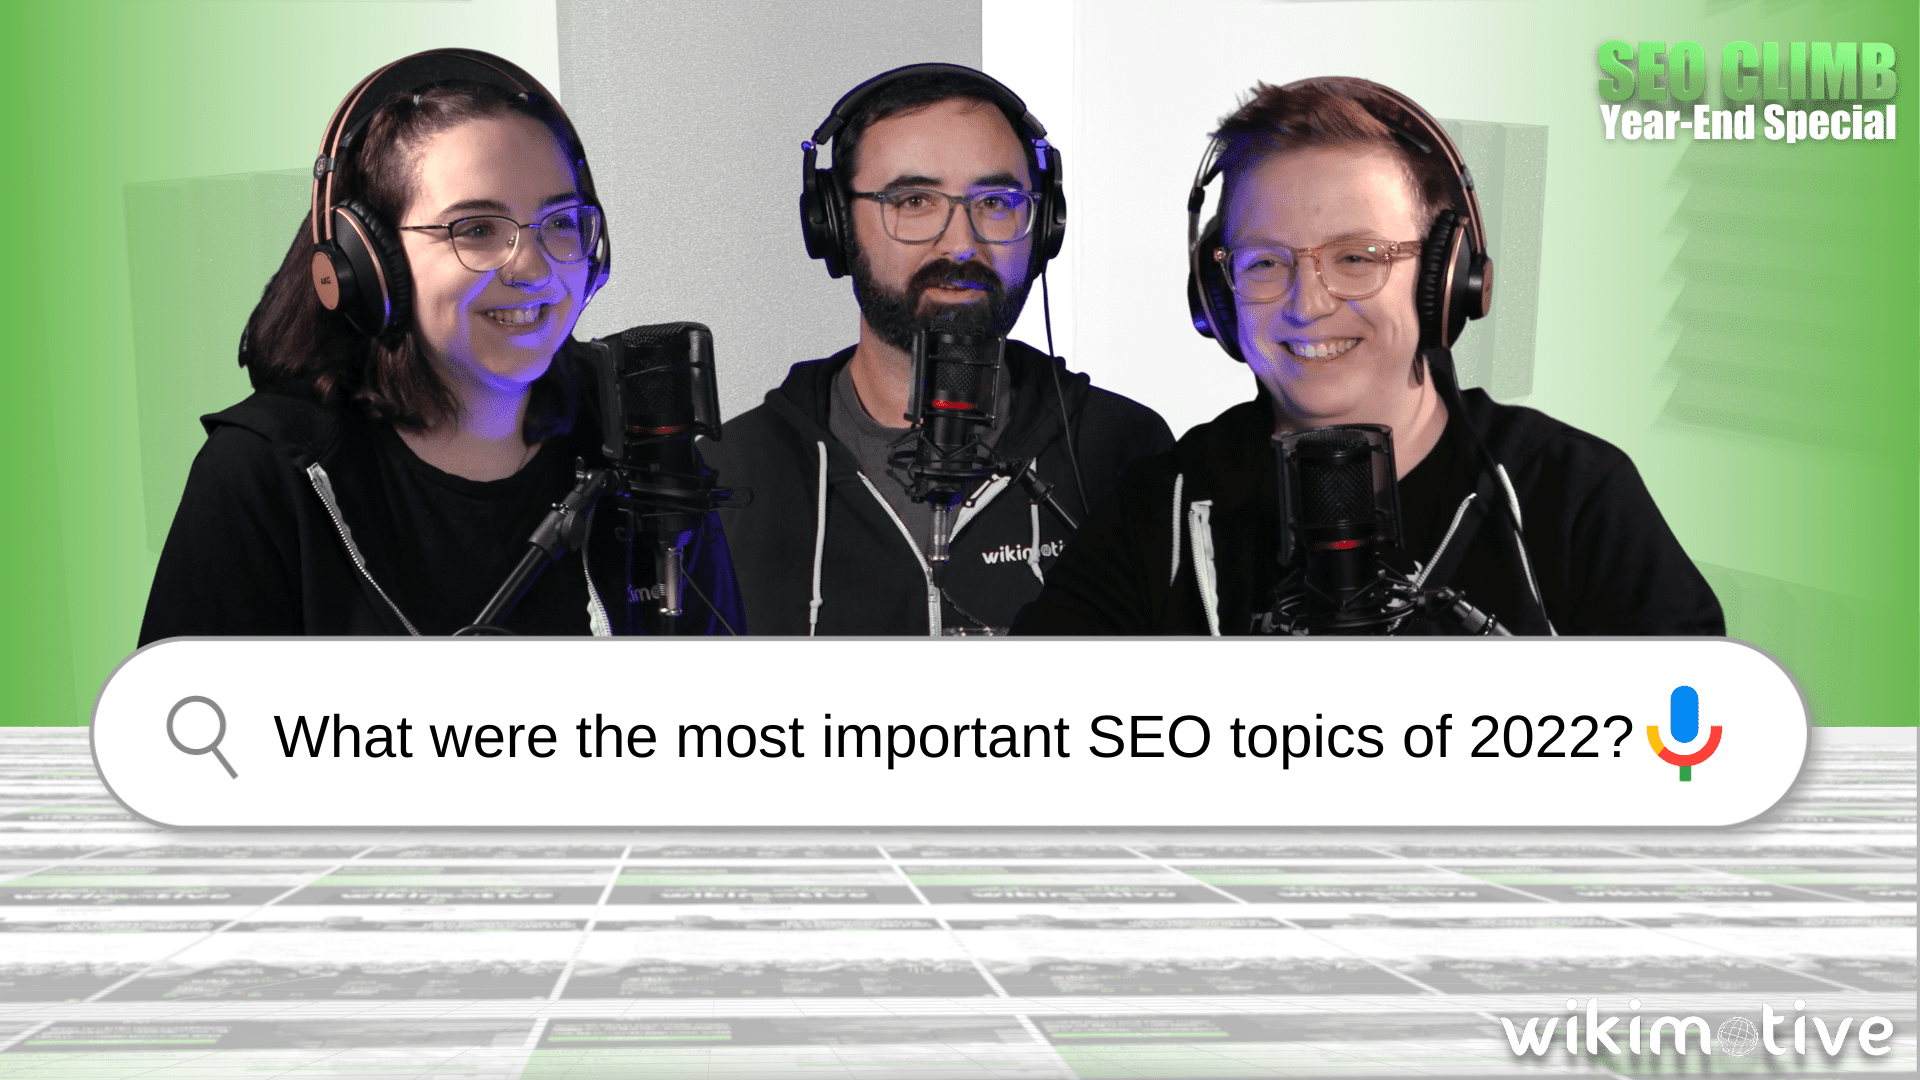 What were the most important SEO topics of 2022?